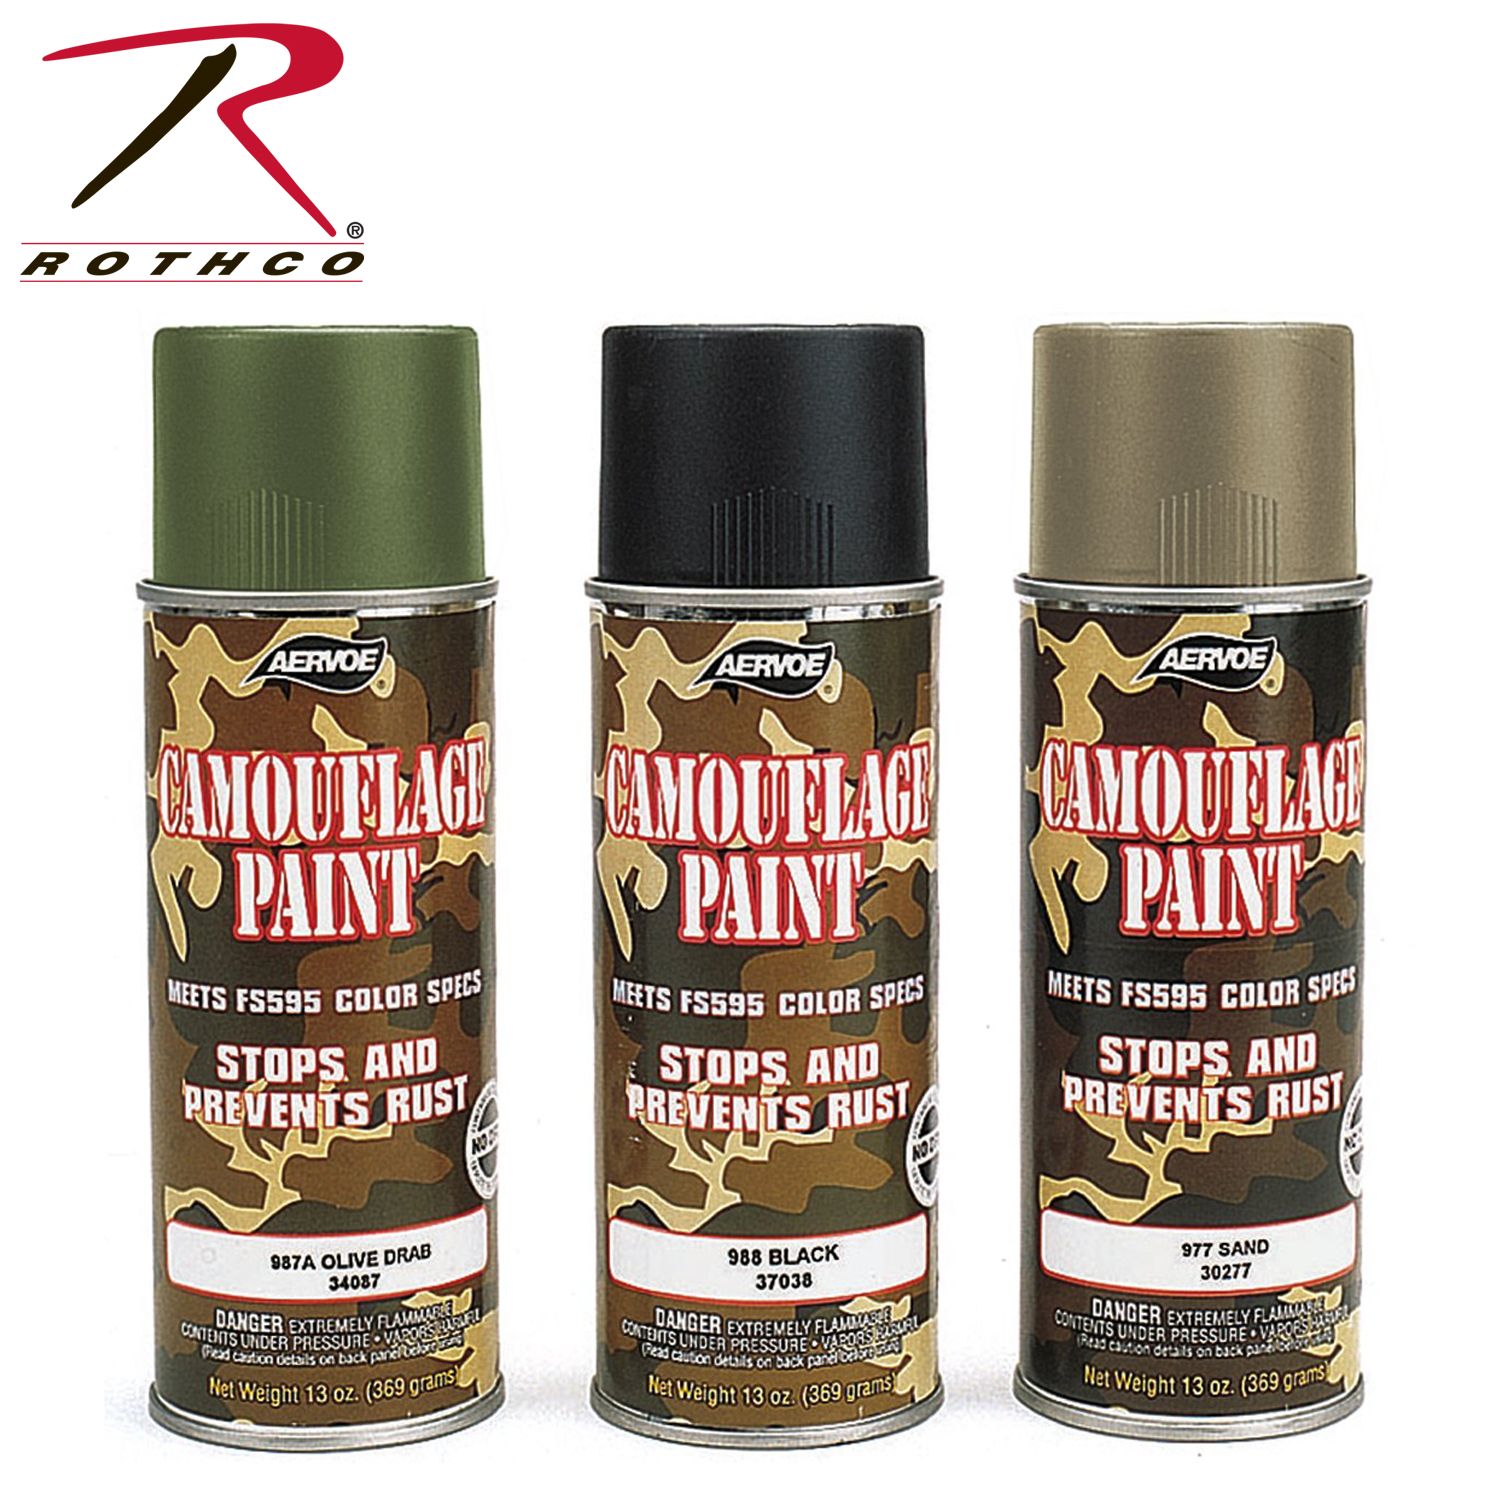 Buy 8223_Rothco Camouflage Spray Paint - Rothco Online at Best price - NJ